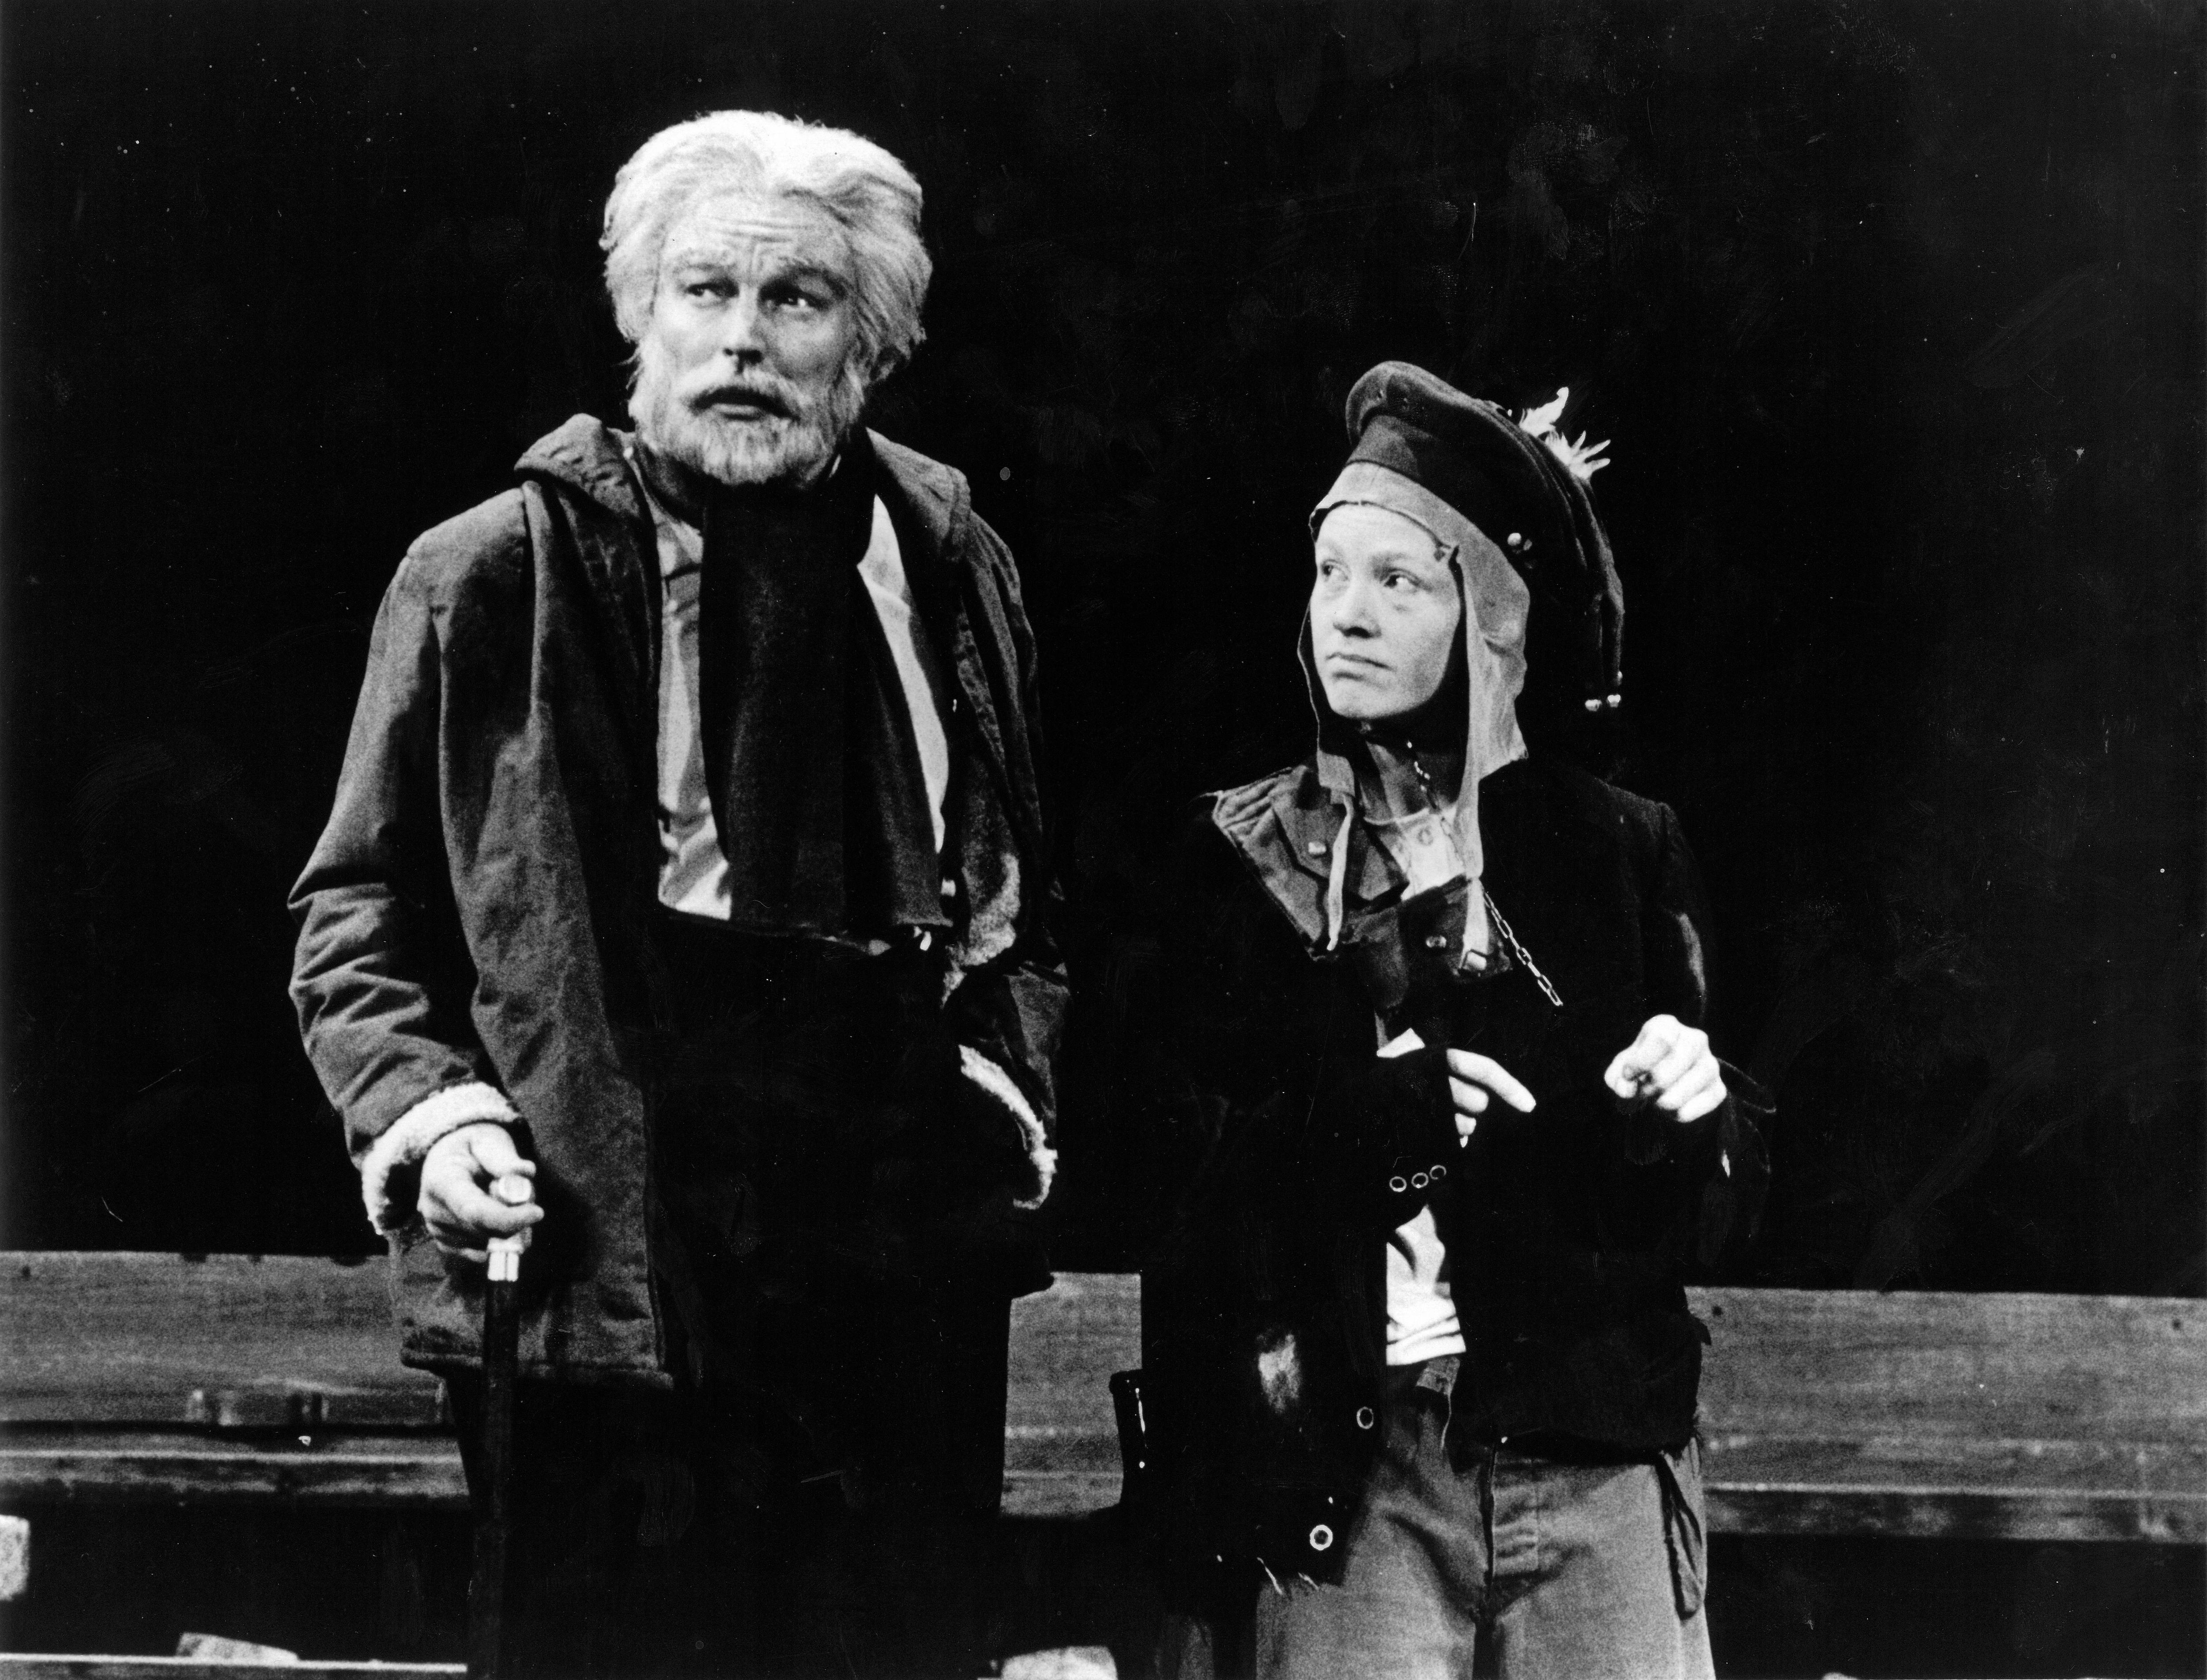 Black and white historical image of a man and woman acting in a Shakespeare play